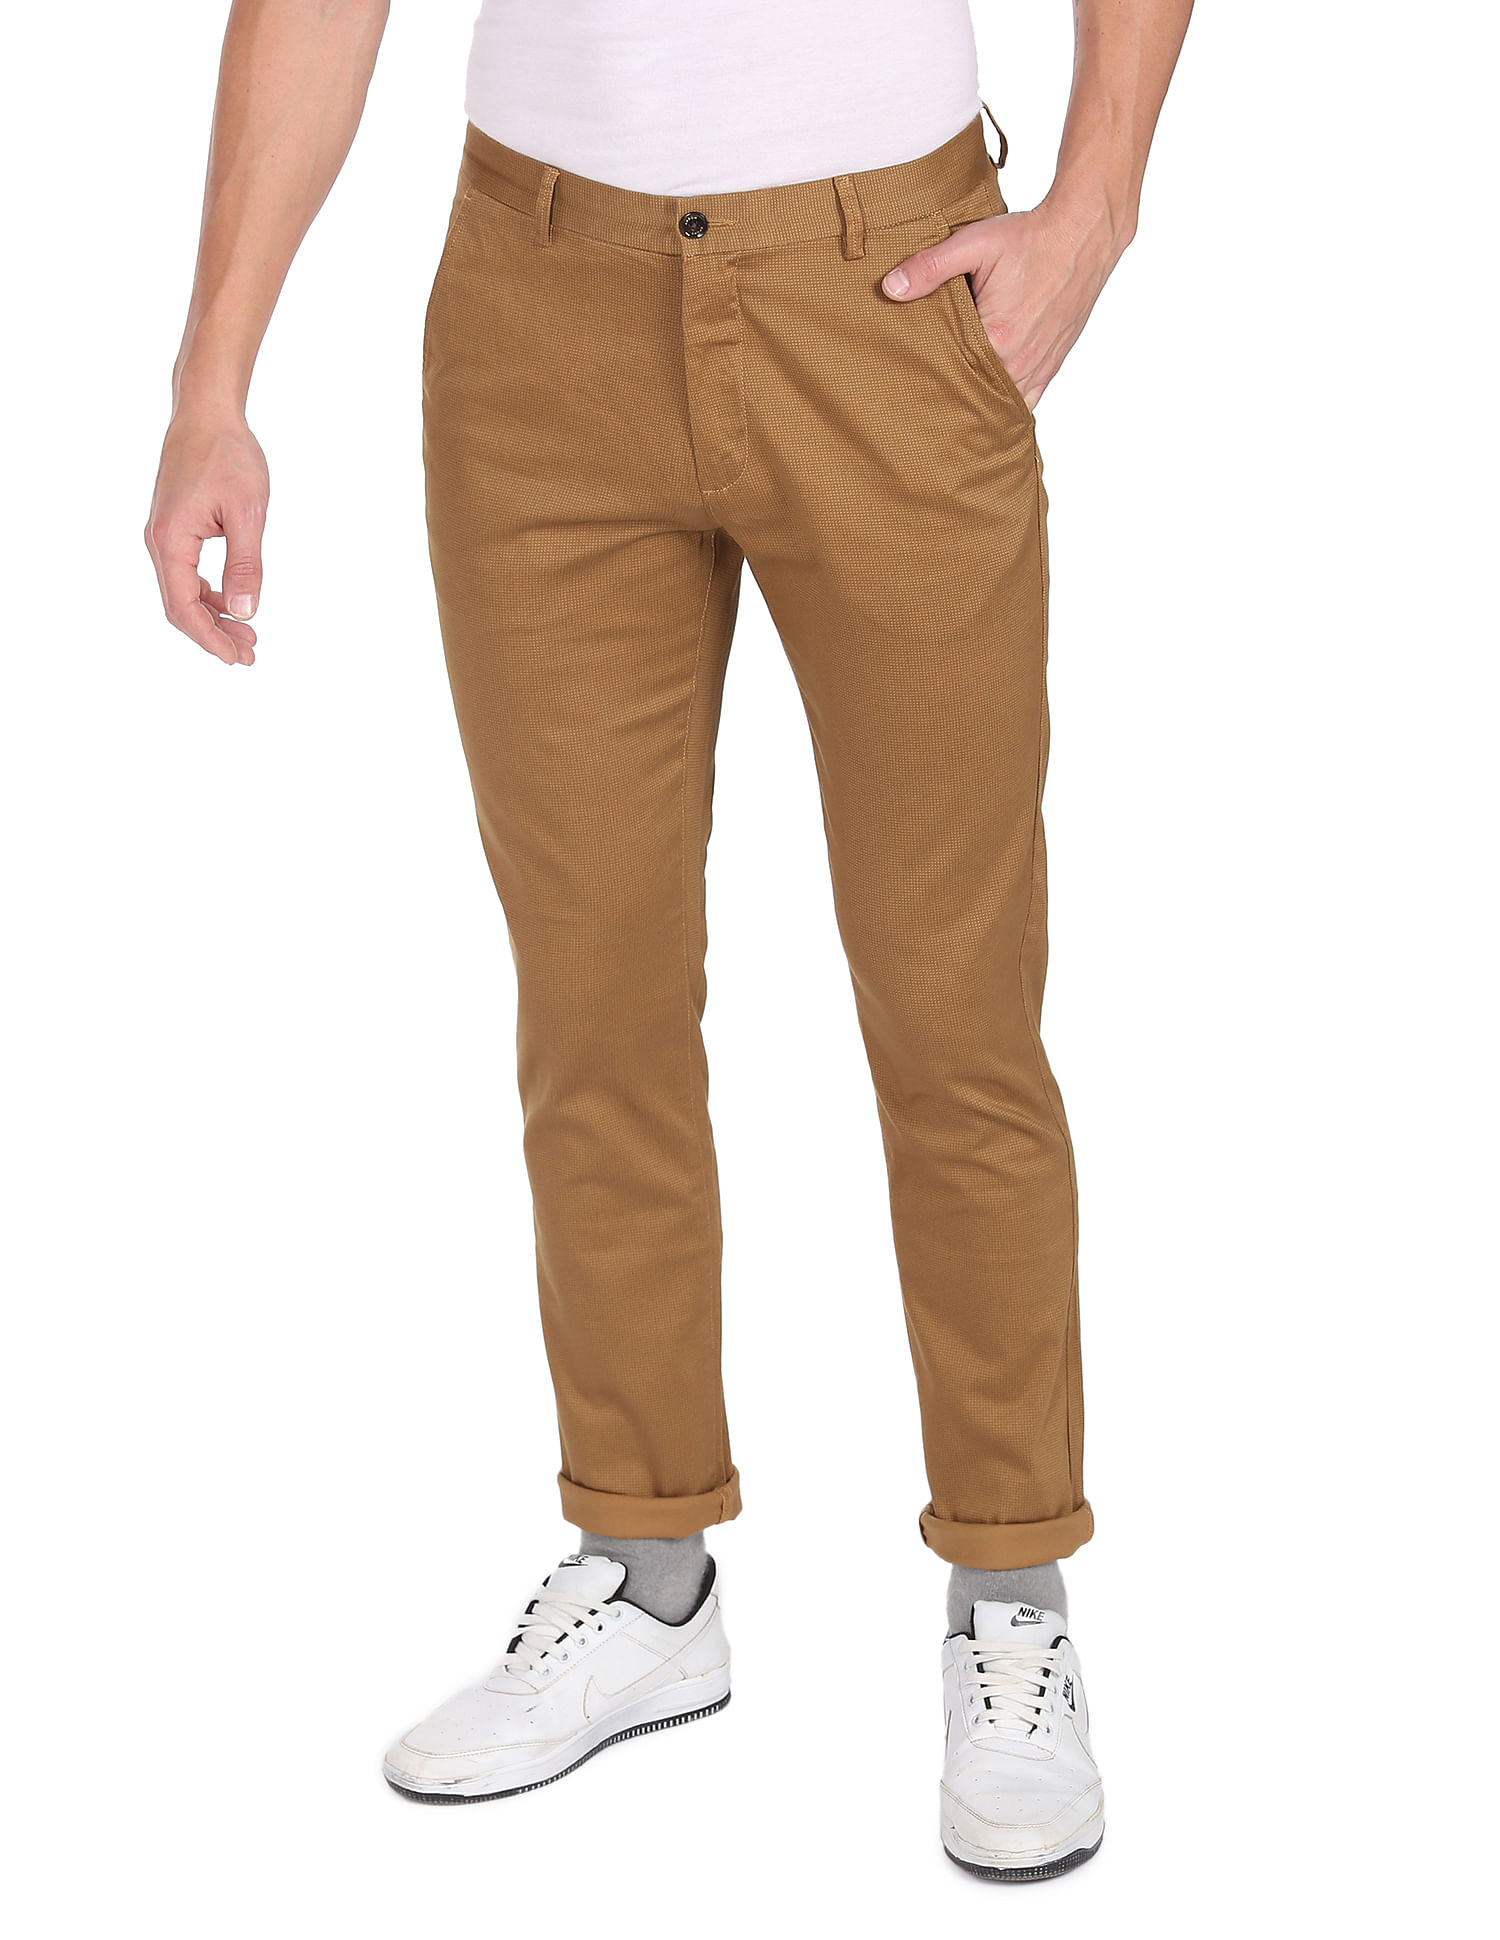 Comfort and Style Combined Panzar Brand Mens Trousers  Panzarjeans   indias no1 jeans manufacturing company